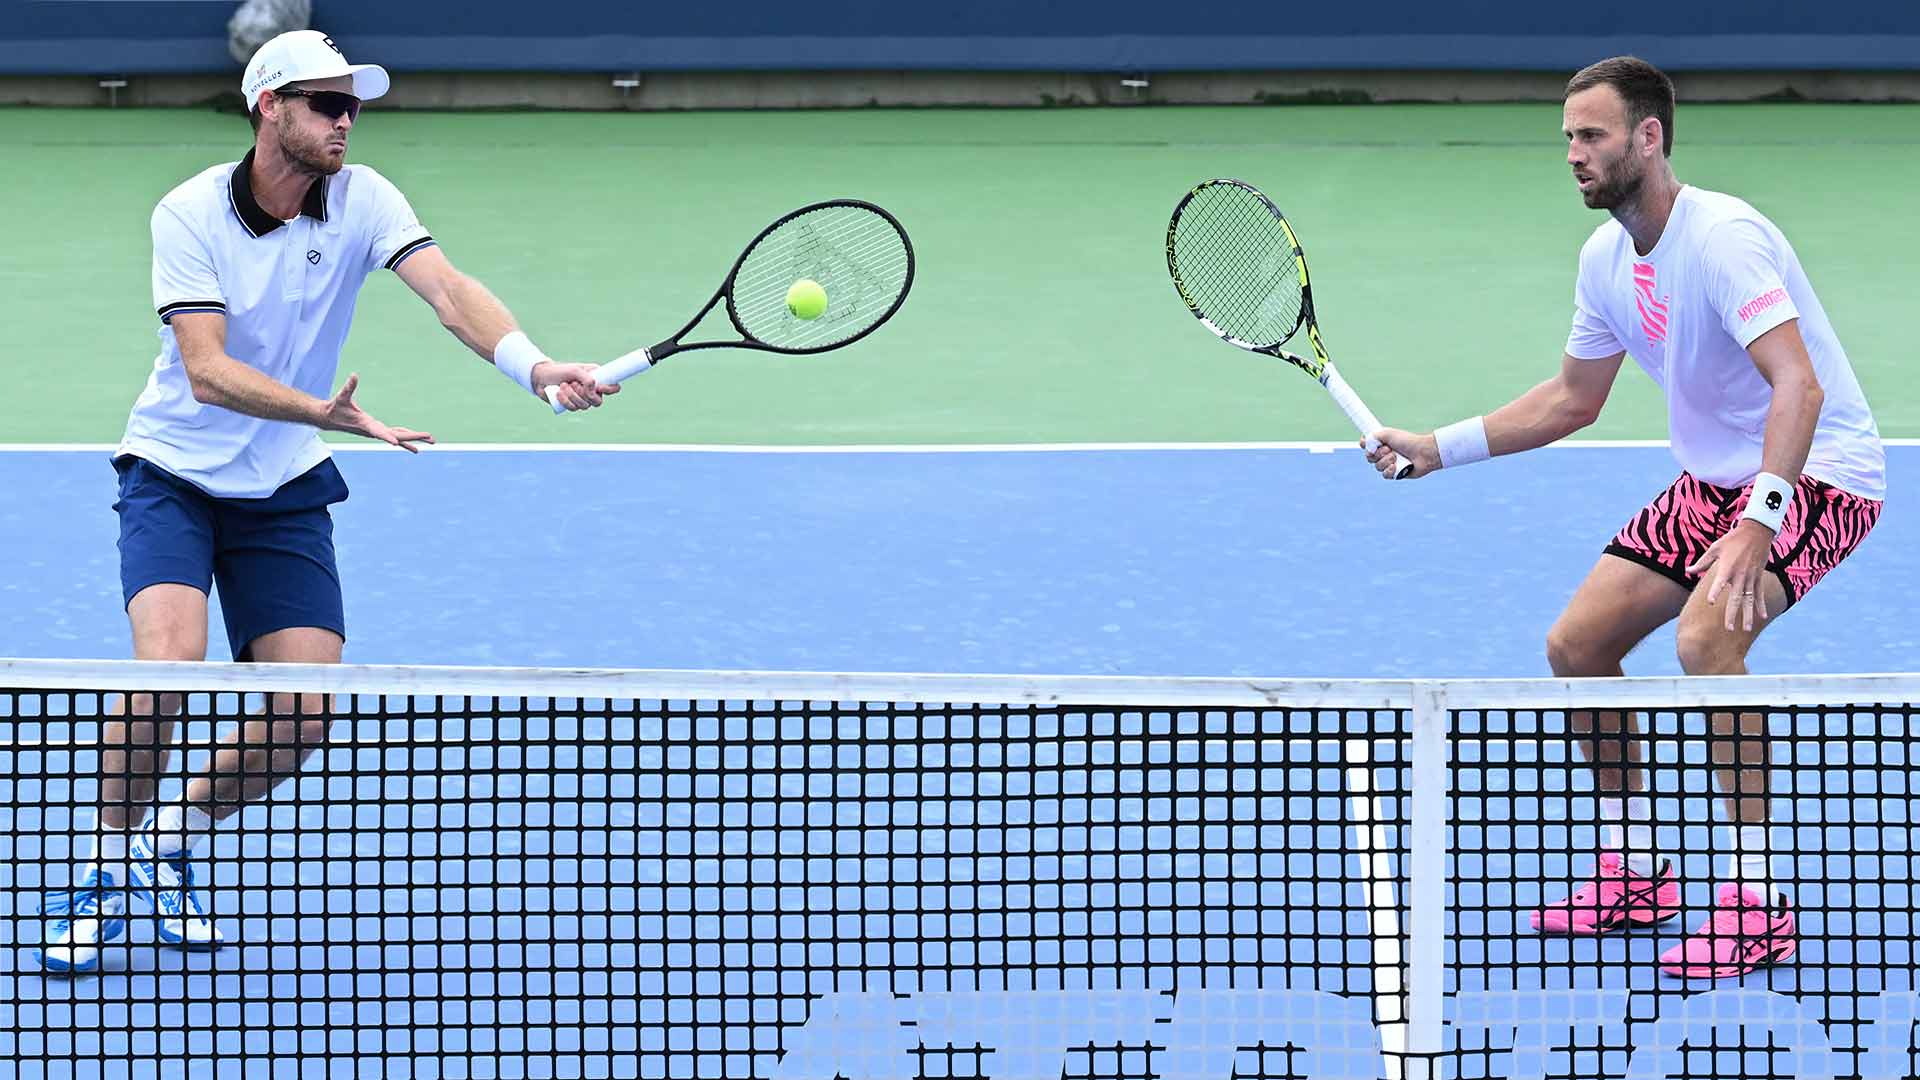 Jamie Murray and Michael Venus save all three break points they face en route to victory on Tuesday in Cincinnati.